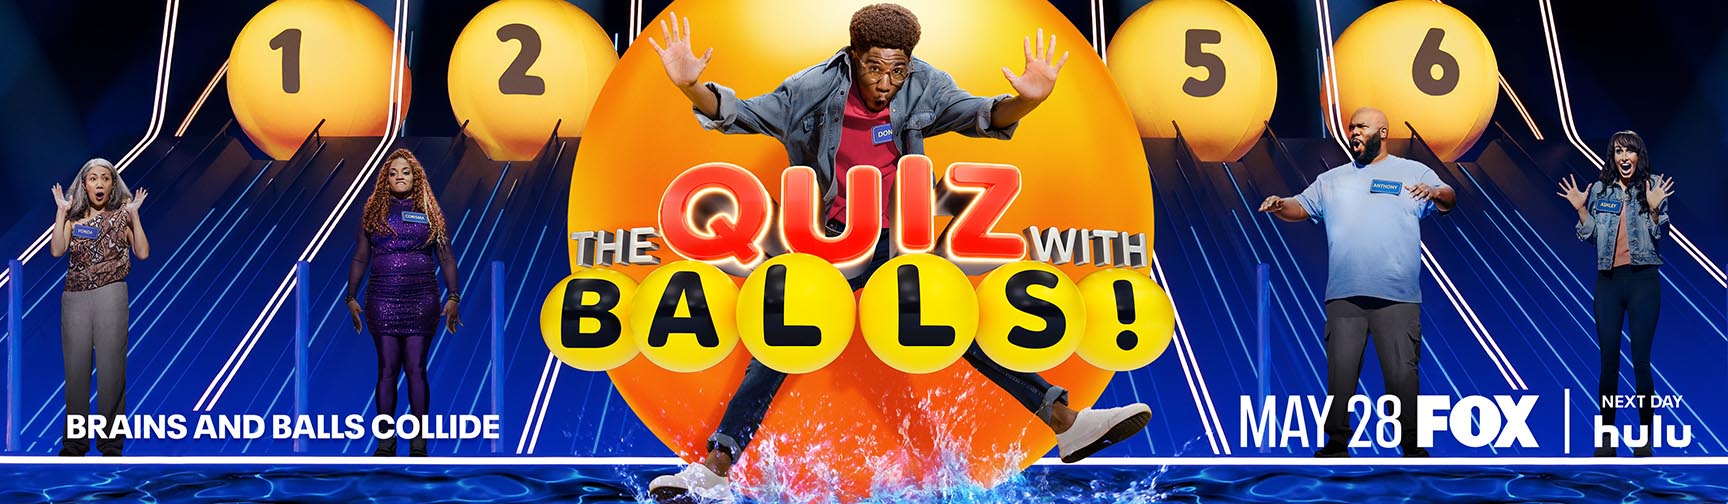 Permalink to: The Quiz with Balls